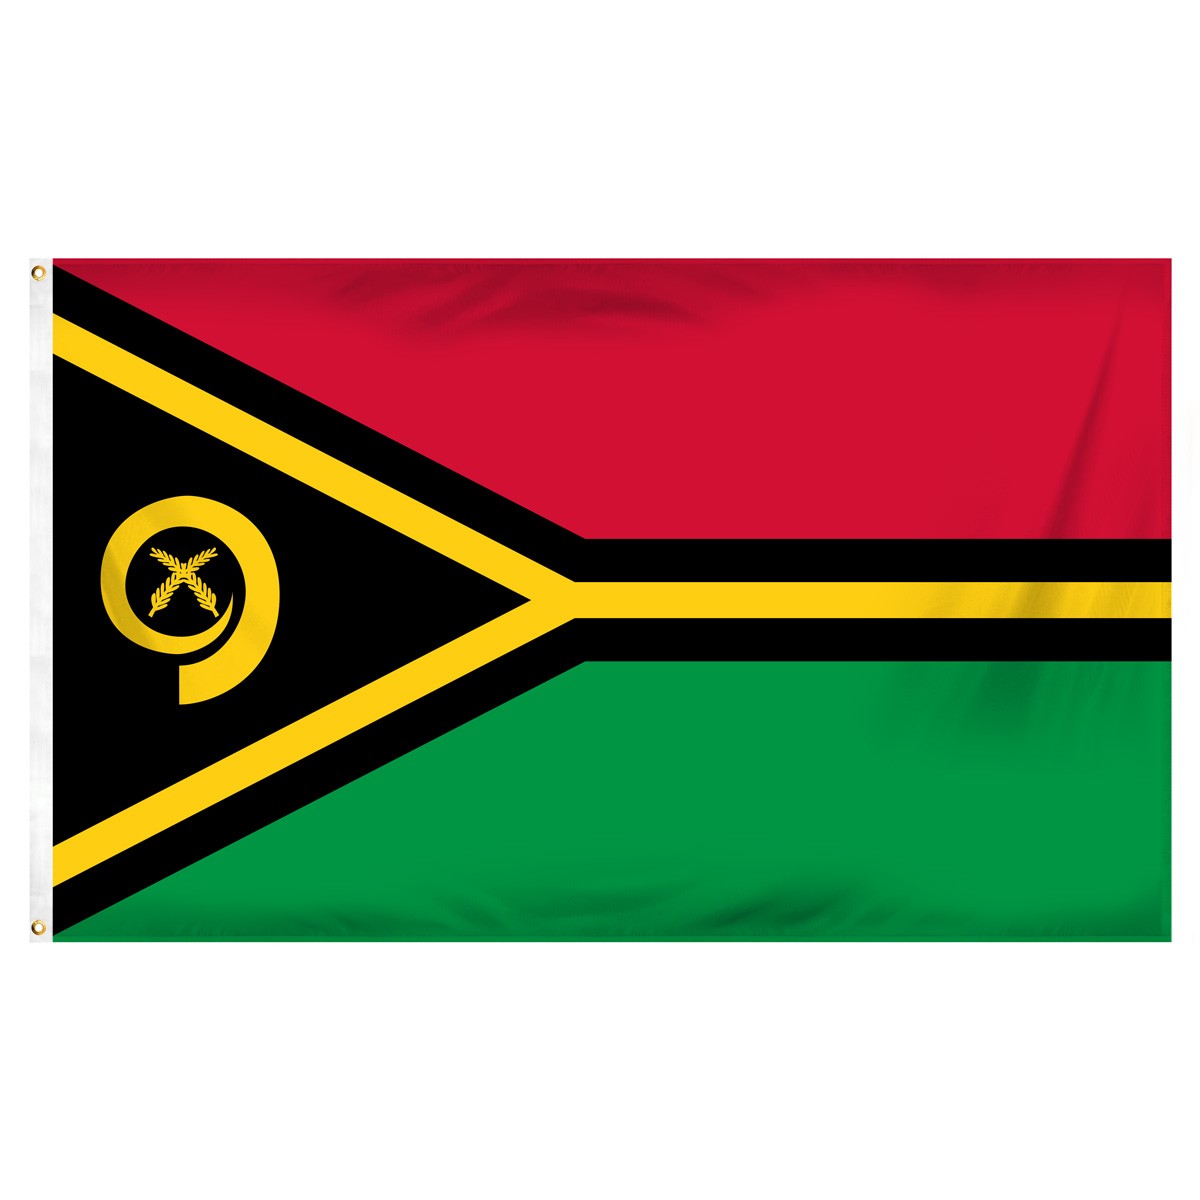 Vanuatu Submit Flags and Flags